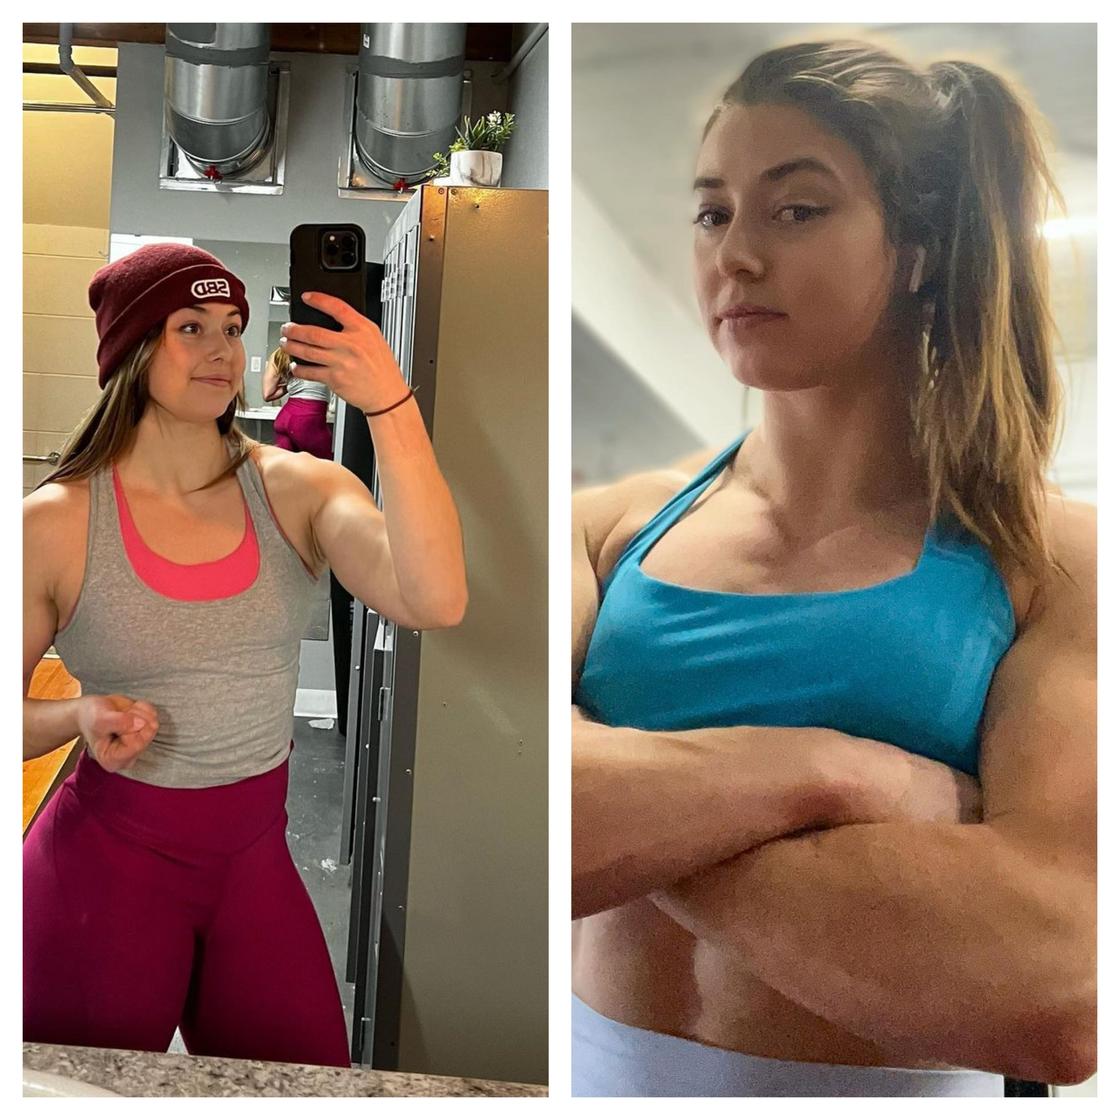 Jessica enjoys a large following on social media with over a quarter of a million followers on Instagram alone.She is one of the best female powerlifters in the world in her weight class (Photo by Jessica Buettner on Instagram)